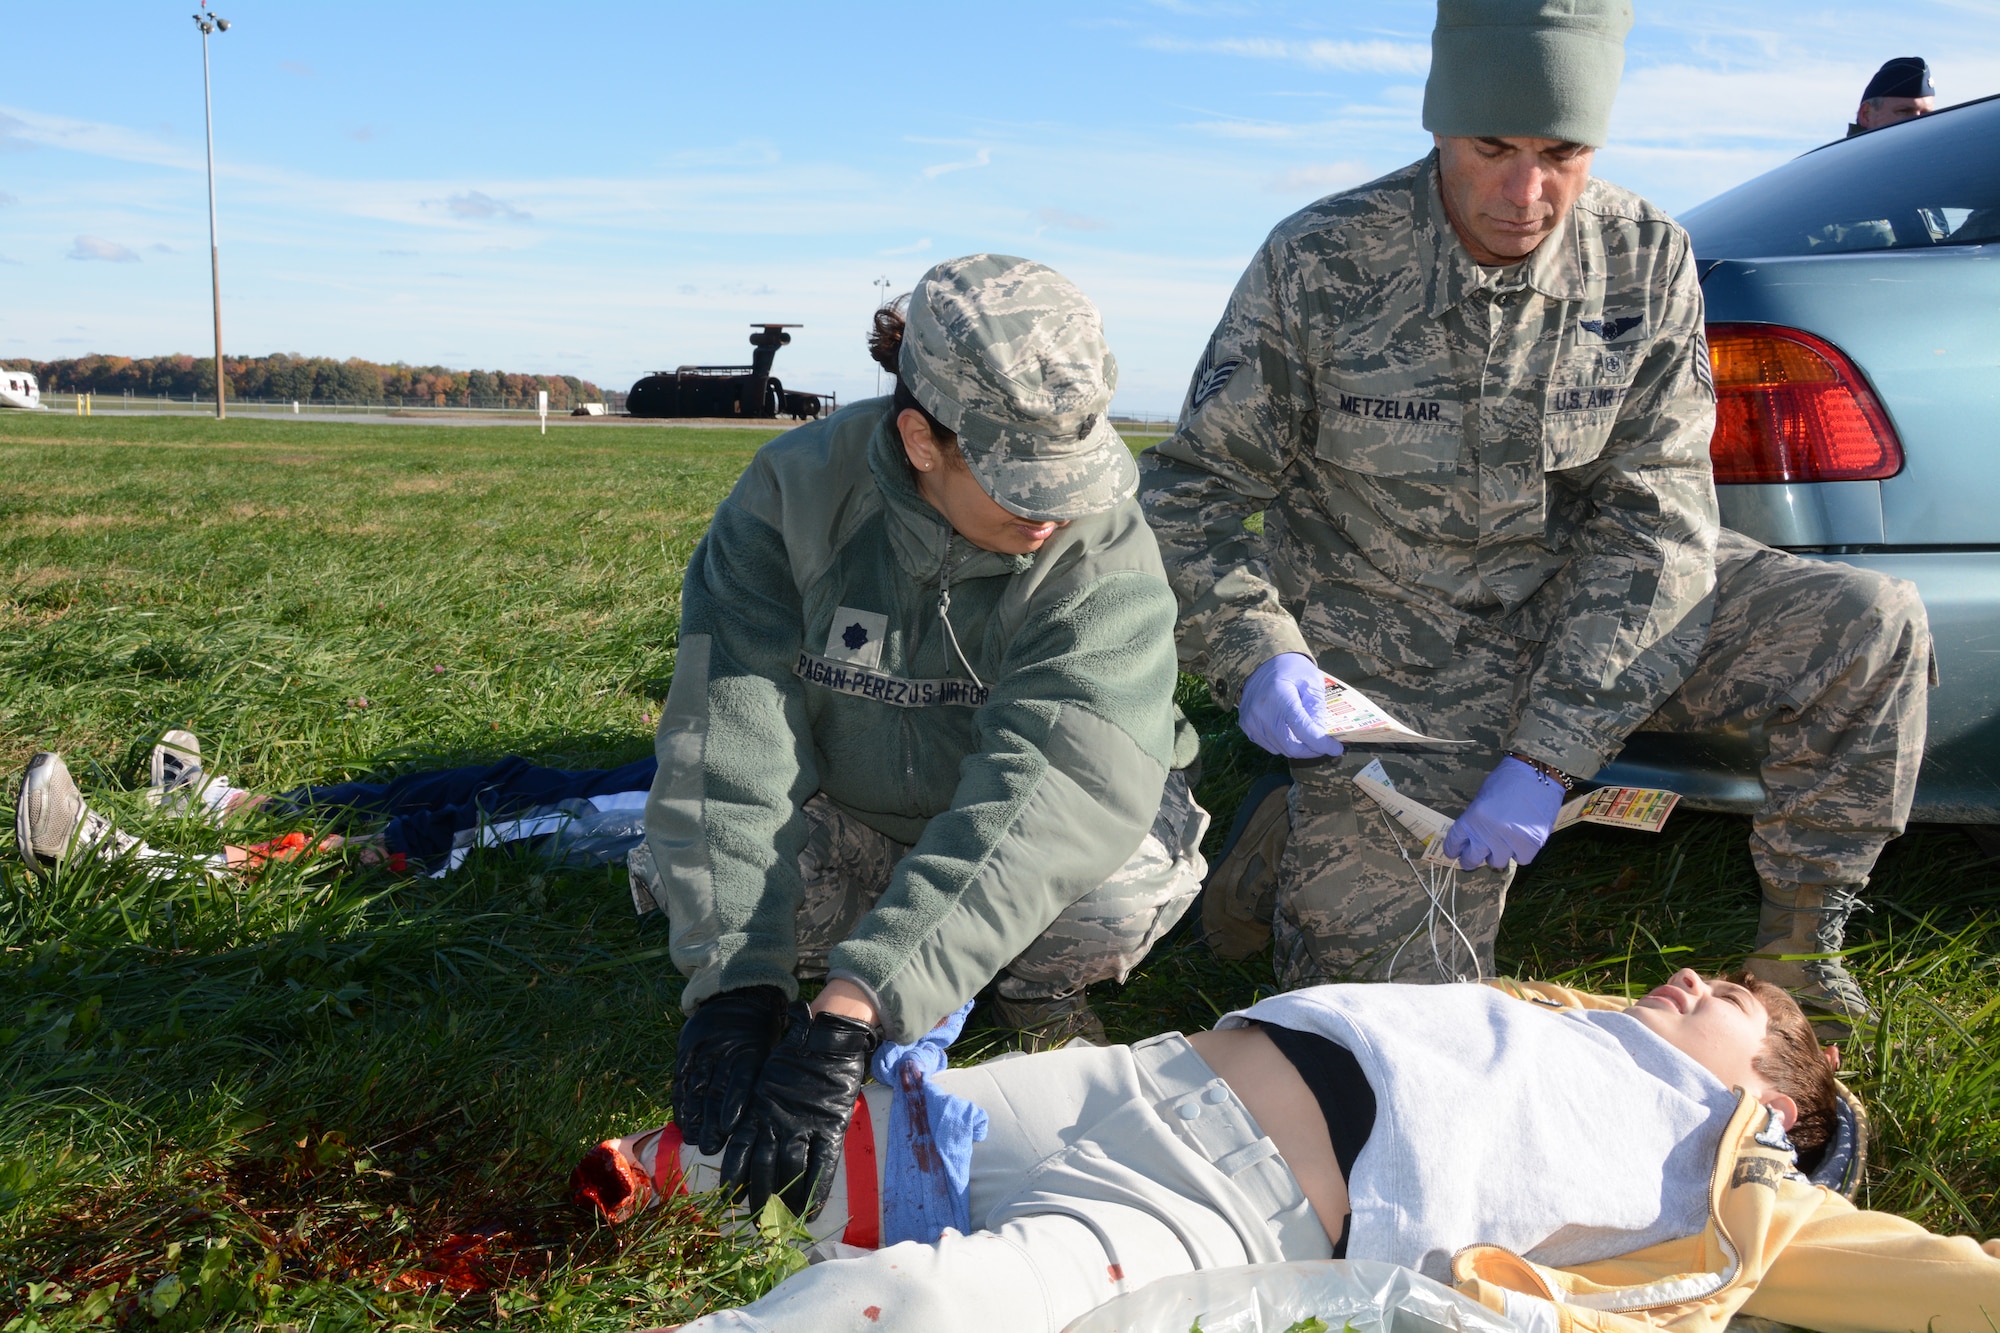 Lt. Col. Mildred Pagan-Perez (left) and Staff Sgt. Mark Metzelaar, 512th Aerospace Medicine Squadron, simulate first response treatment of Delaware Civil Air Patrol cadet Sam Rundle during a training exercise Nov. 2, 2014, at Dover Air Force Base, Del. Rundle and other CAP cadets played the roles of victims to assist the 512th AMDS prepare for real world mass casualty emergencies. (U.S. Air Force photo/Senior Airman Joe Yanik)  